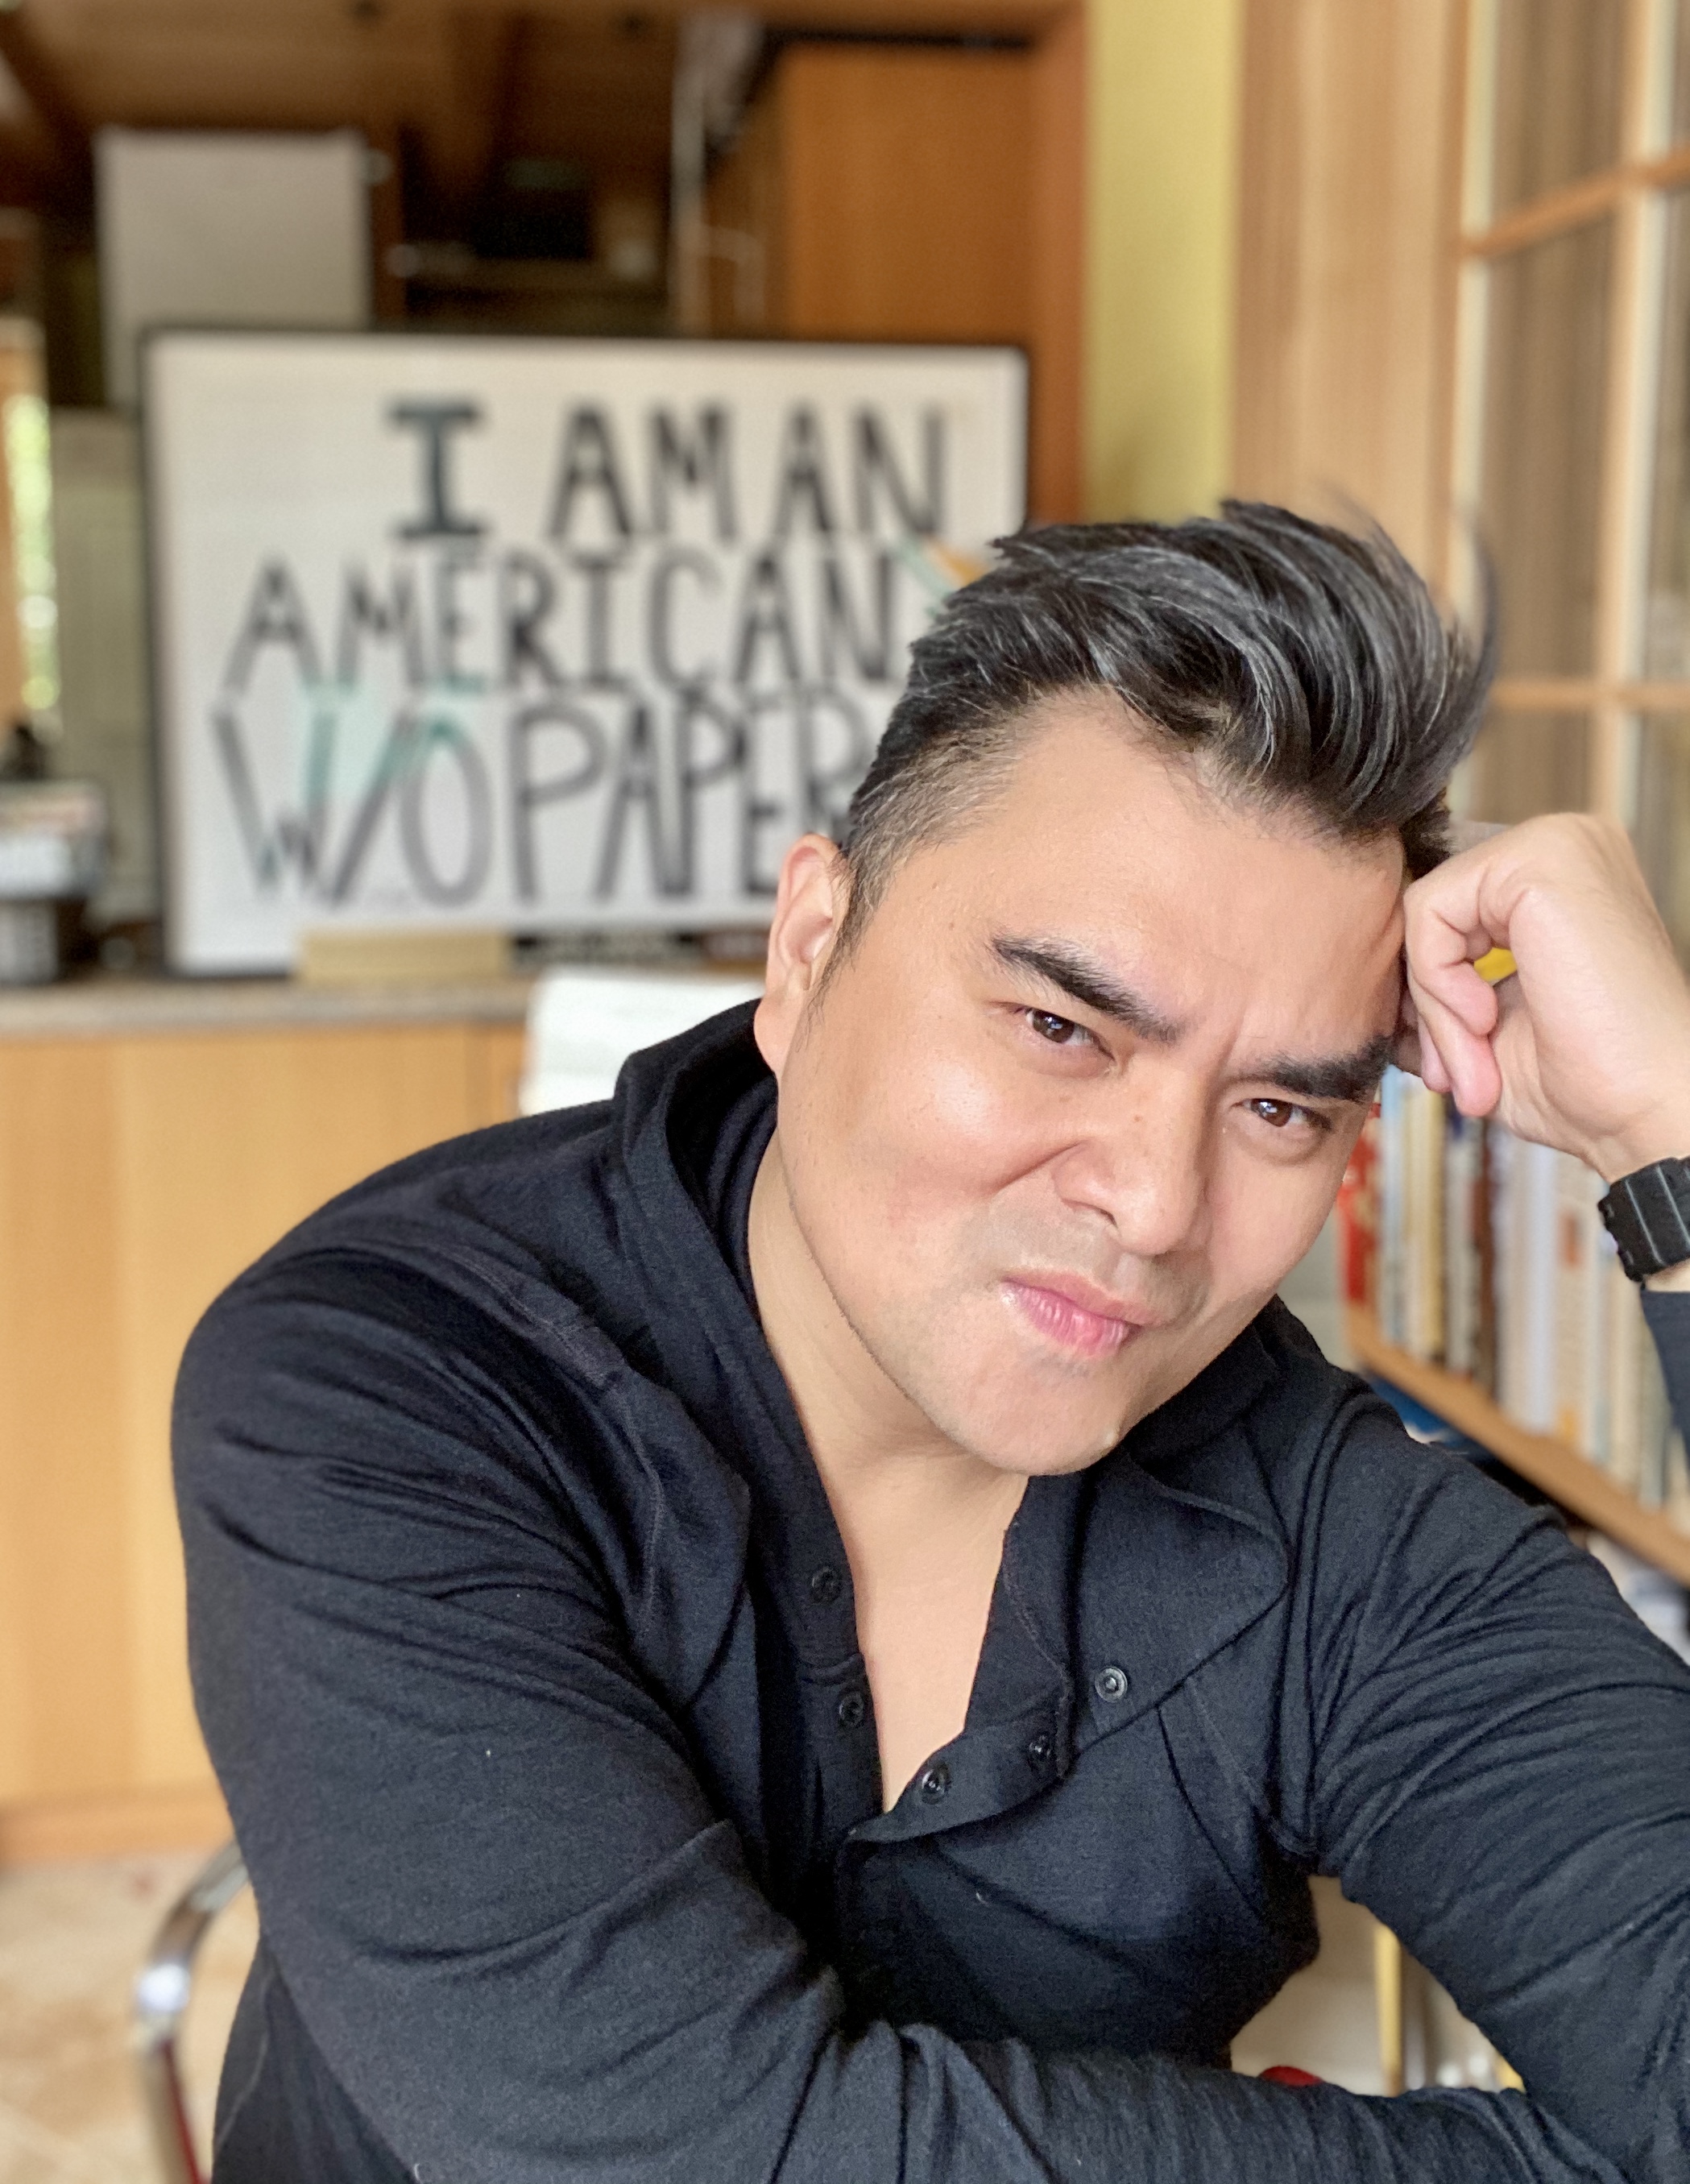 Jose Antonio Vargas wearing a black shirt, looking directly at the camera while propping his head on one hand.